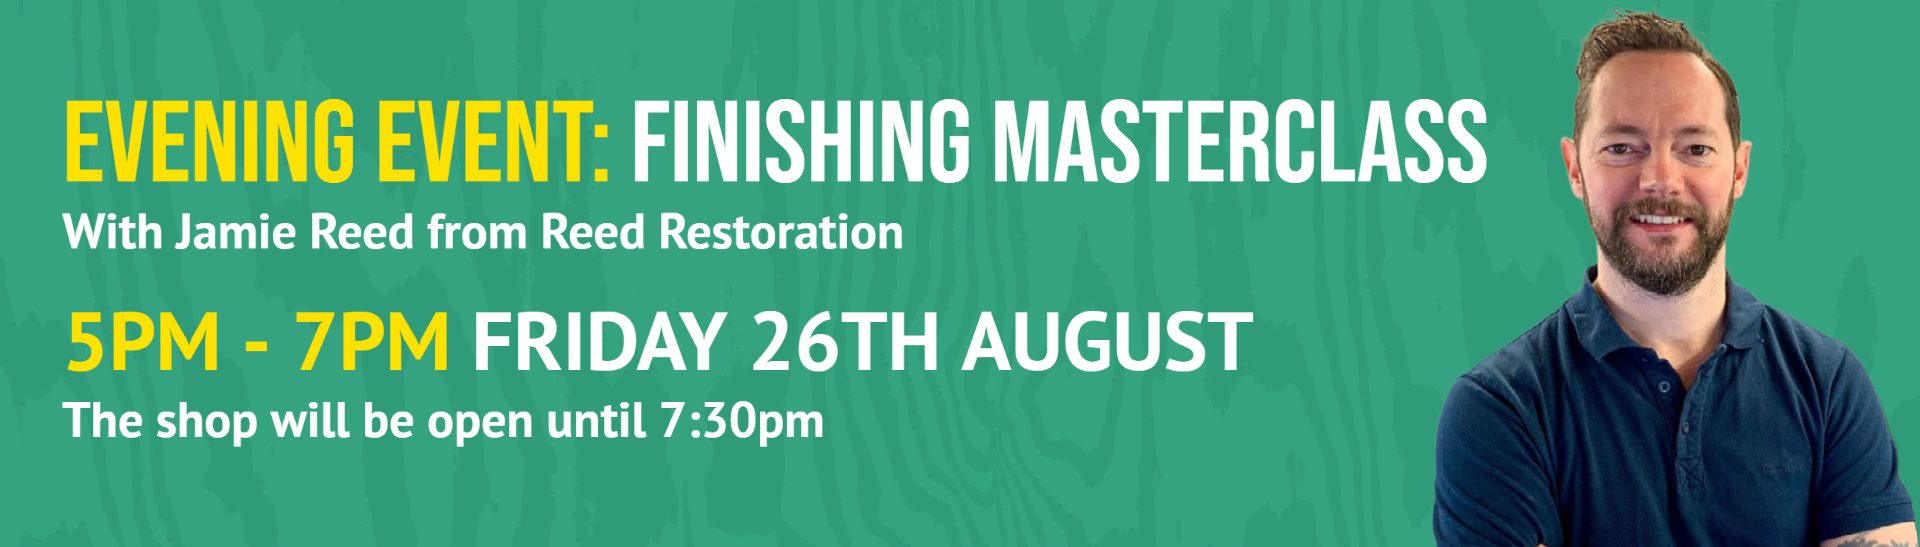 Evening Event: Finishing Masterclass with Jamie Reed